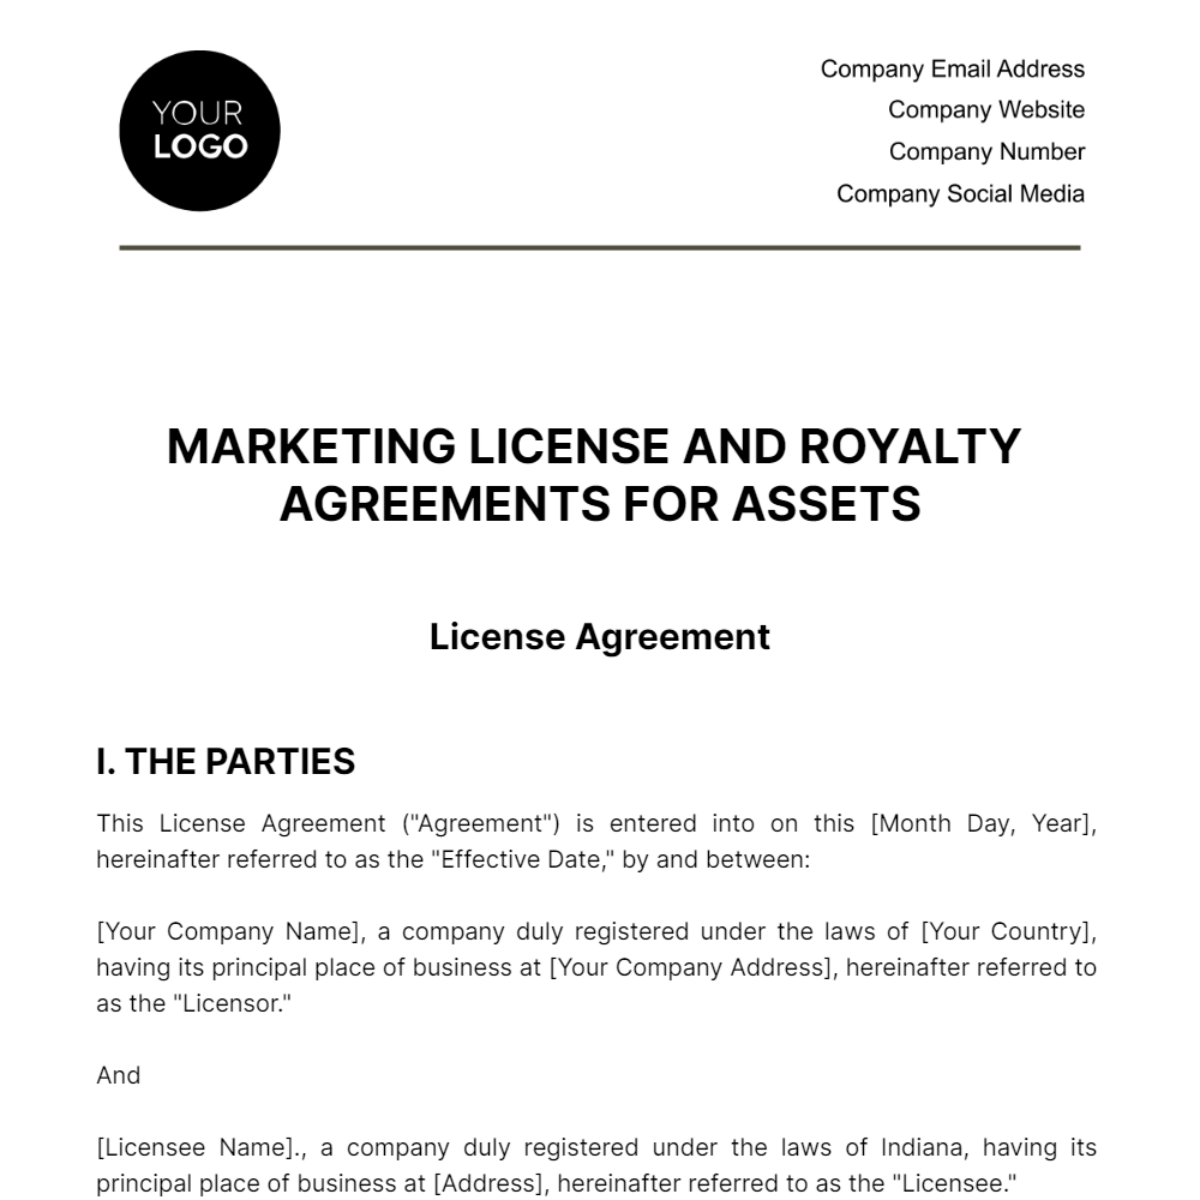 Free Marketing License and Royalty Agreements for Assets Template